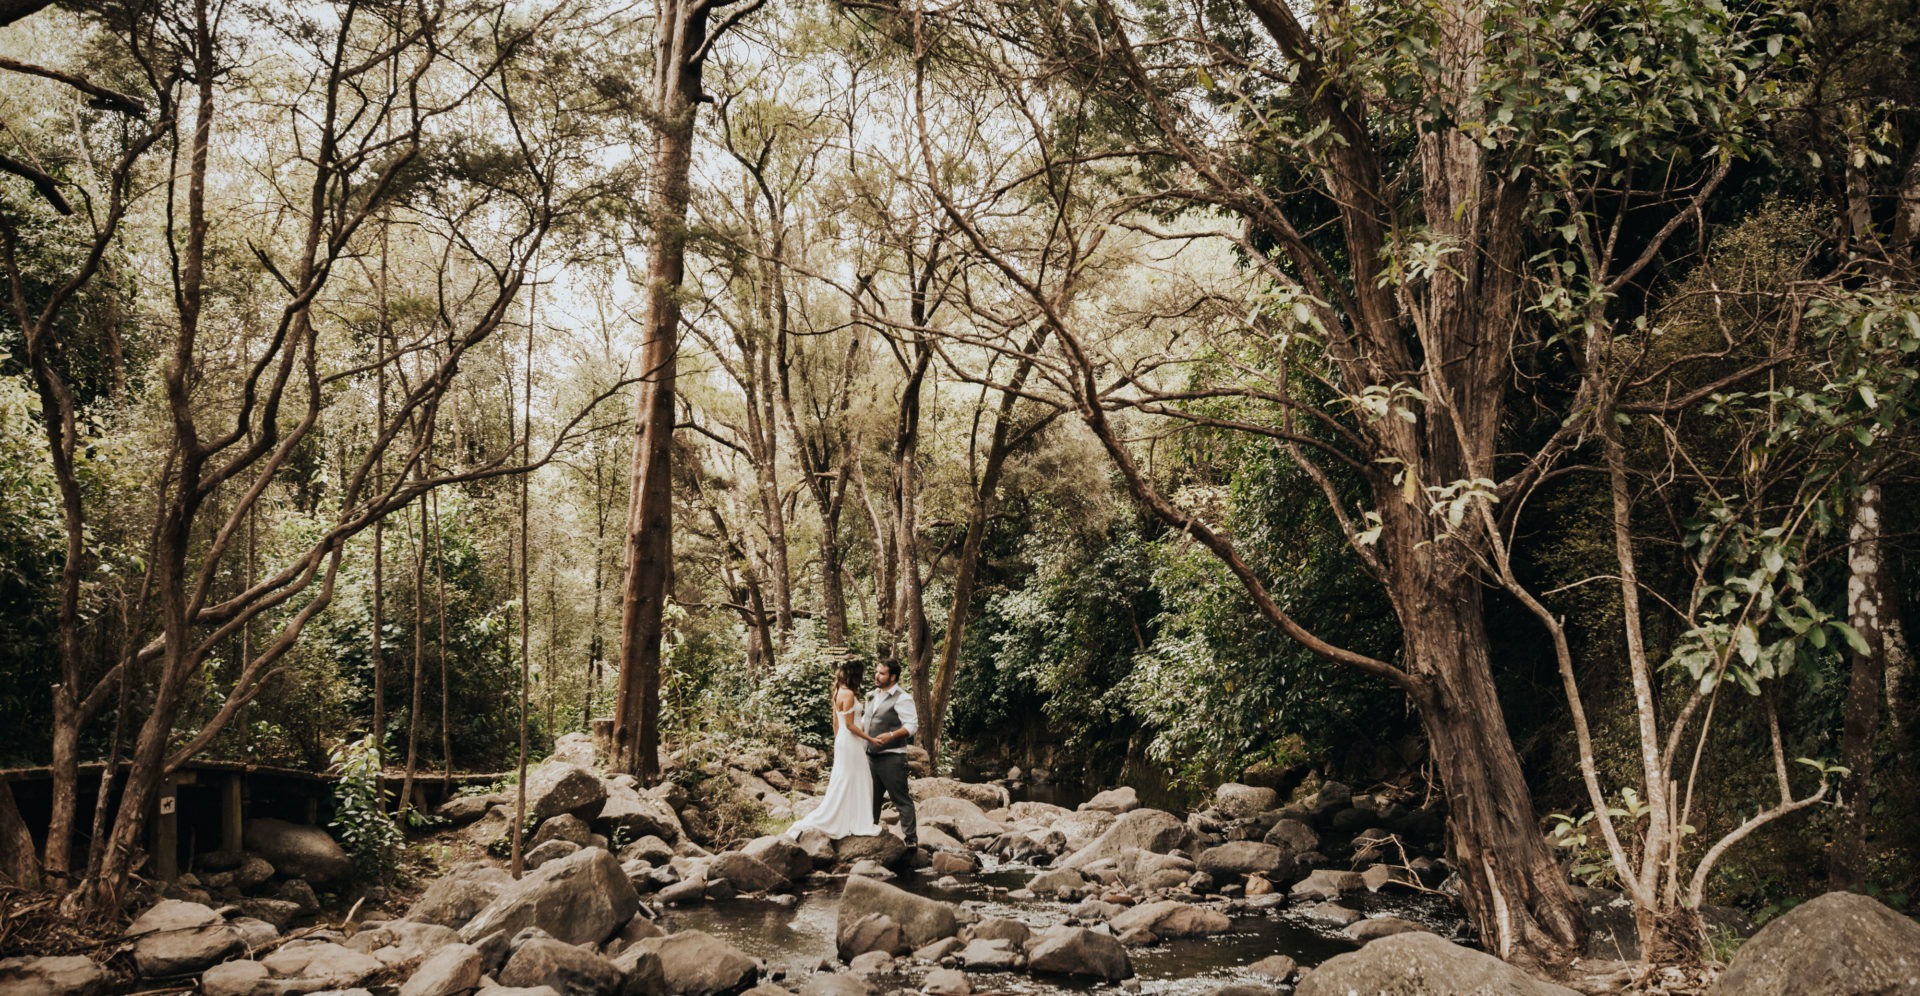 Bride and groom pose in woodlands in New Zealand - Wedding Photography by Tracey Allsopp